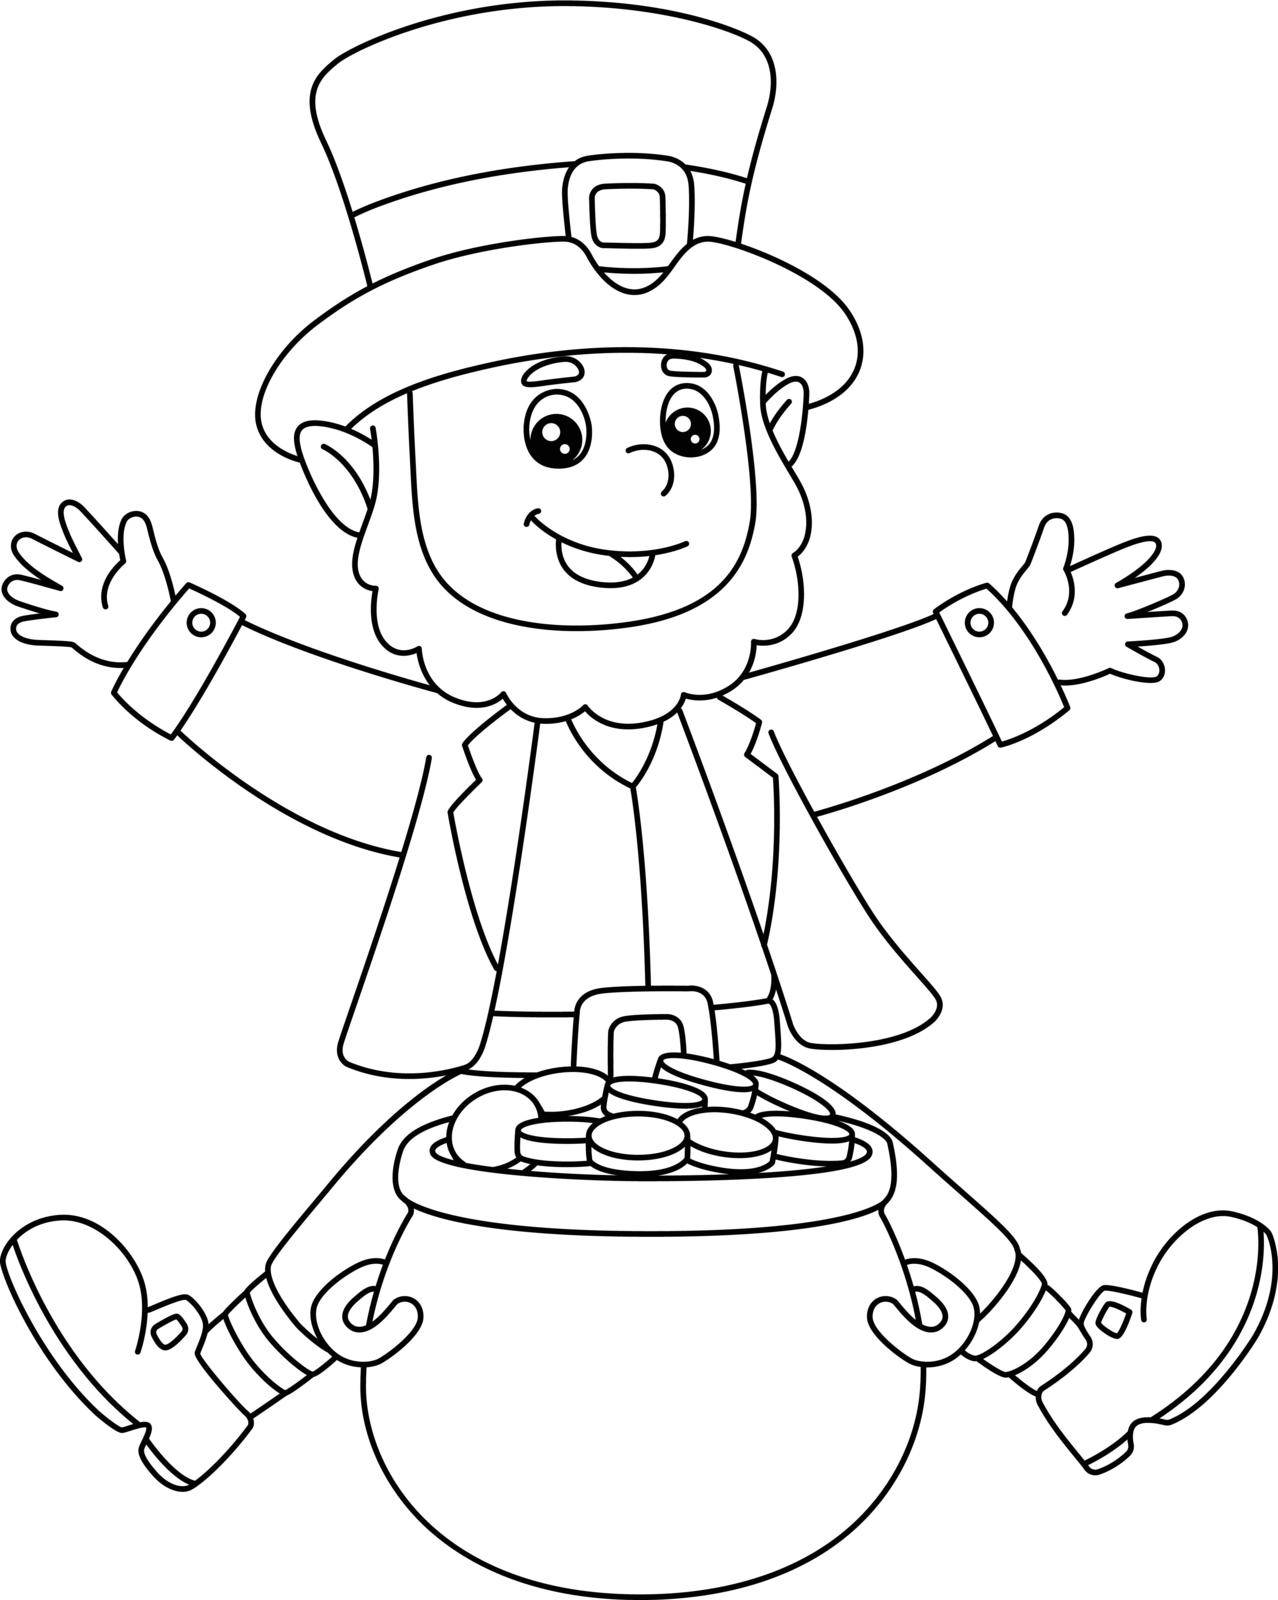 A cute and funny coloring page of St. Patricks Day leprechaun gold coins. Provides hours of coloring fun for children. To color, this page is very easy. Suitable for little kids and toddlers.